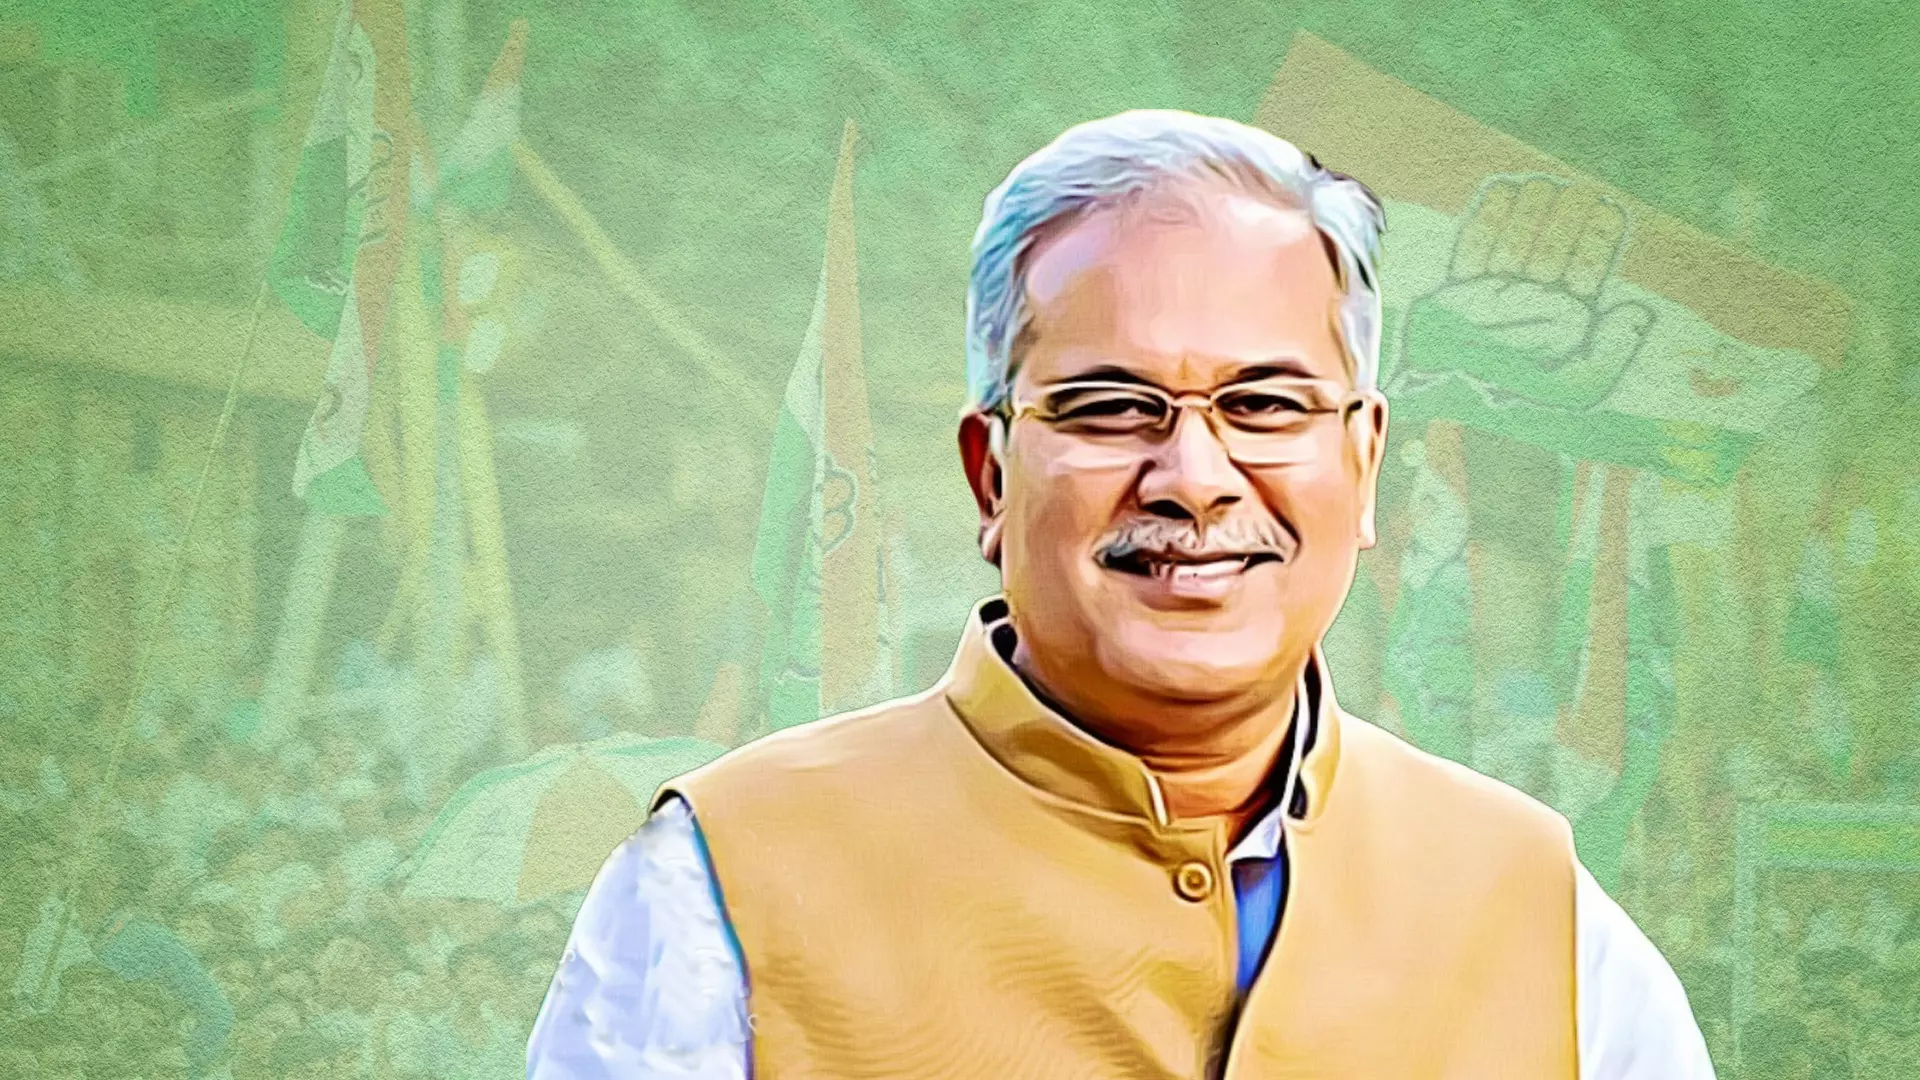 From also-ran to Chhattisgarh Congress star: The meteoric rise of Bhupesh Baghel